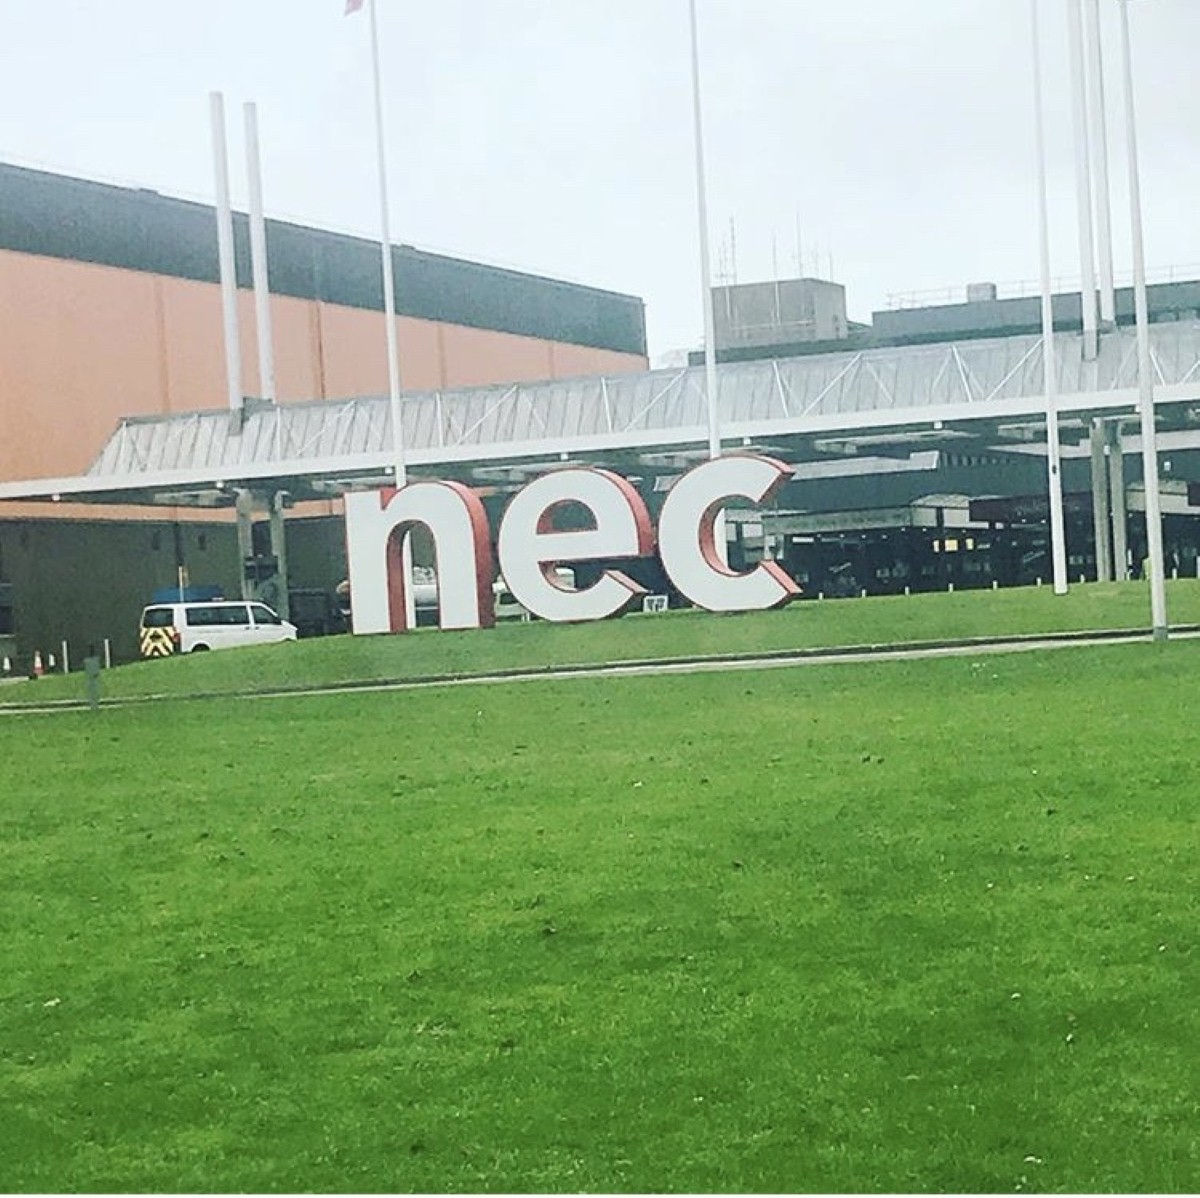 Our crazy week at the NEC Show